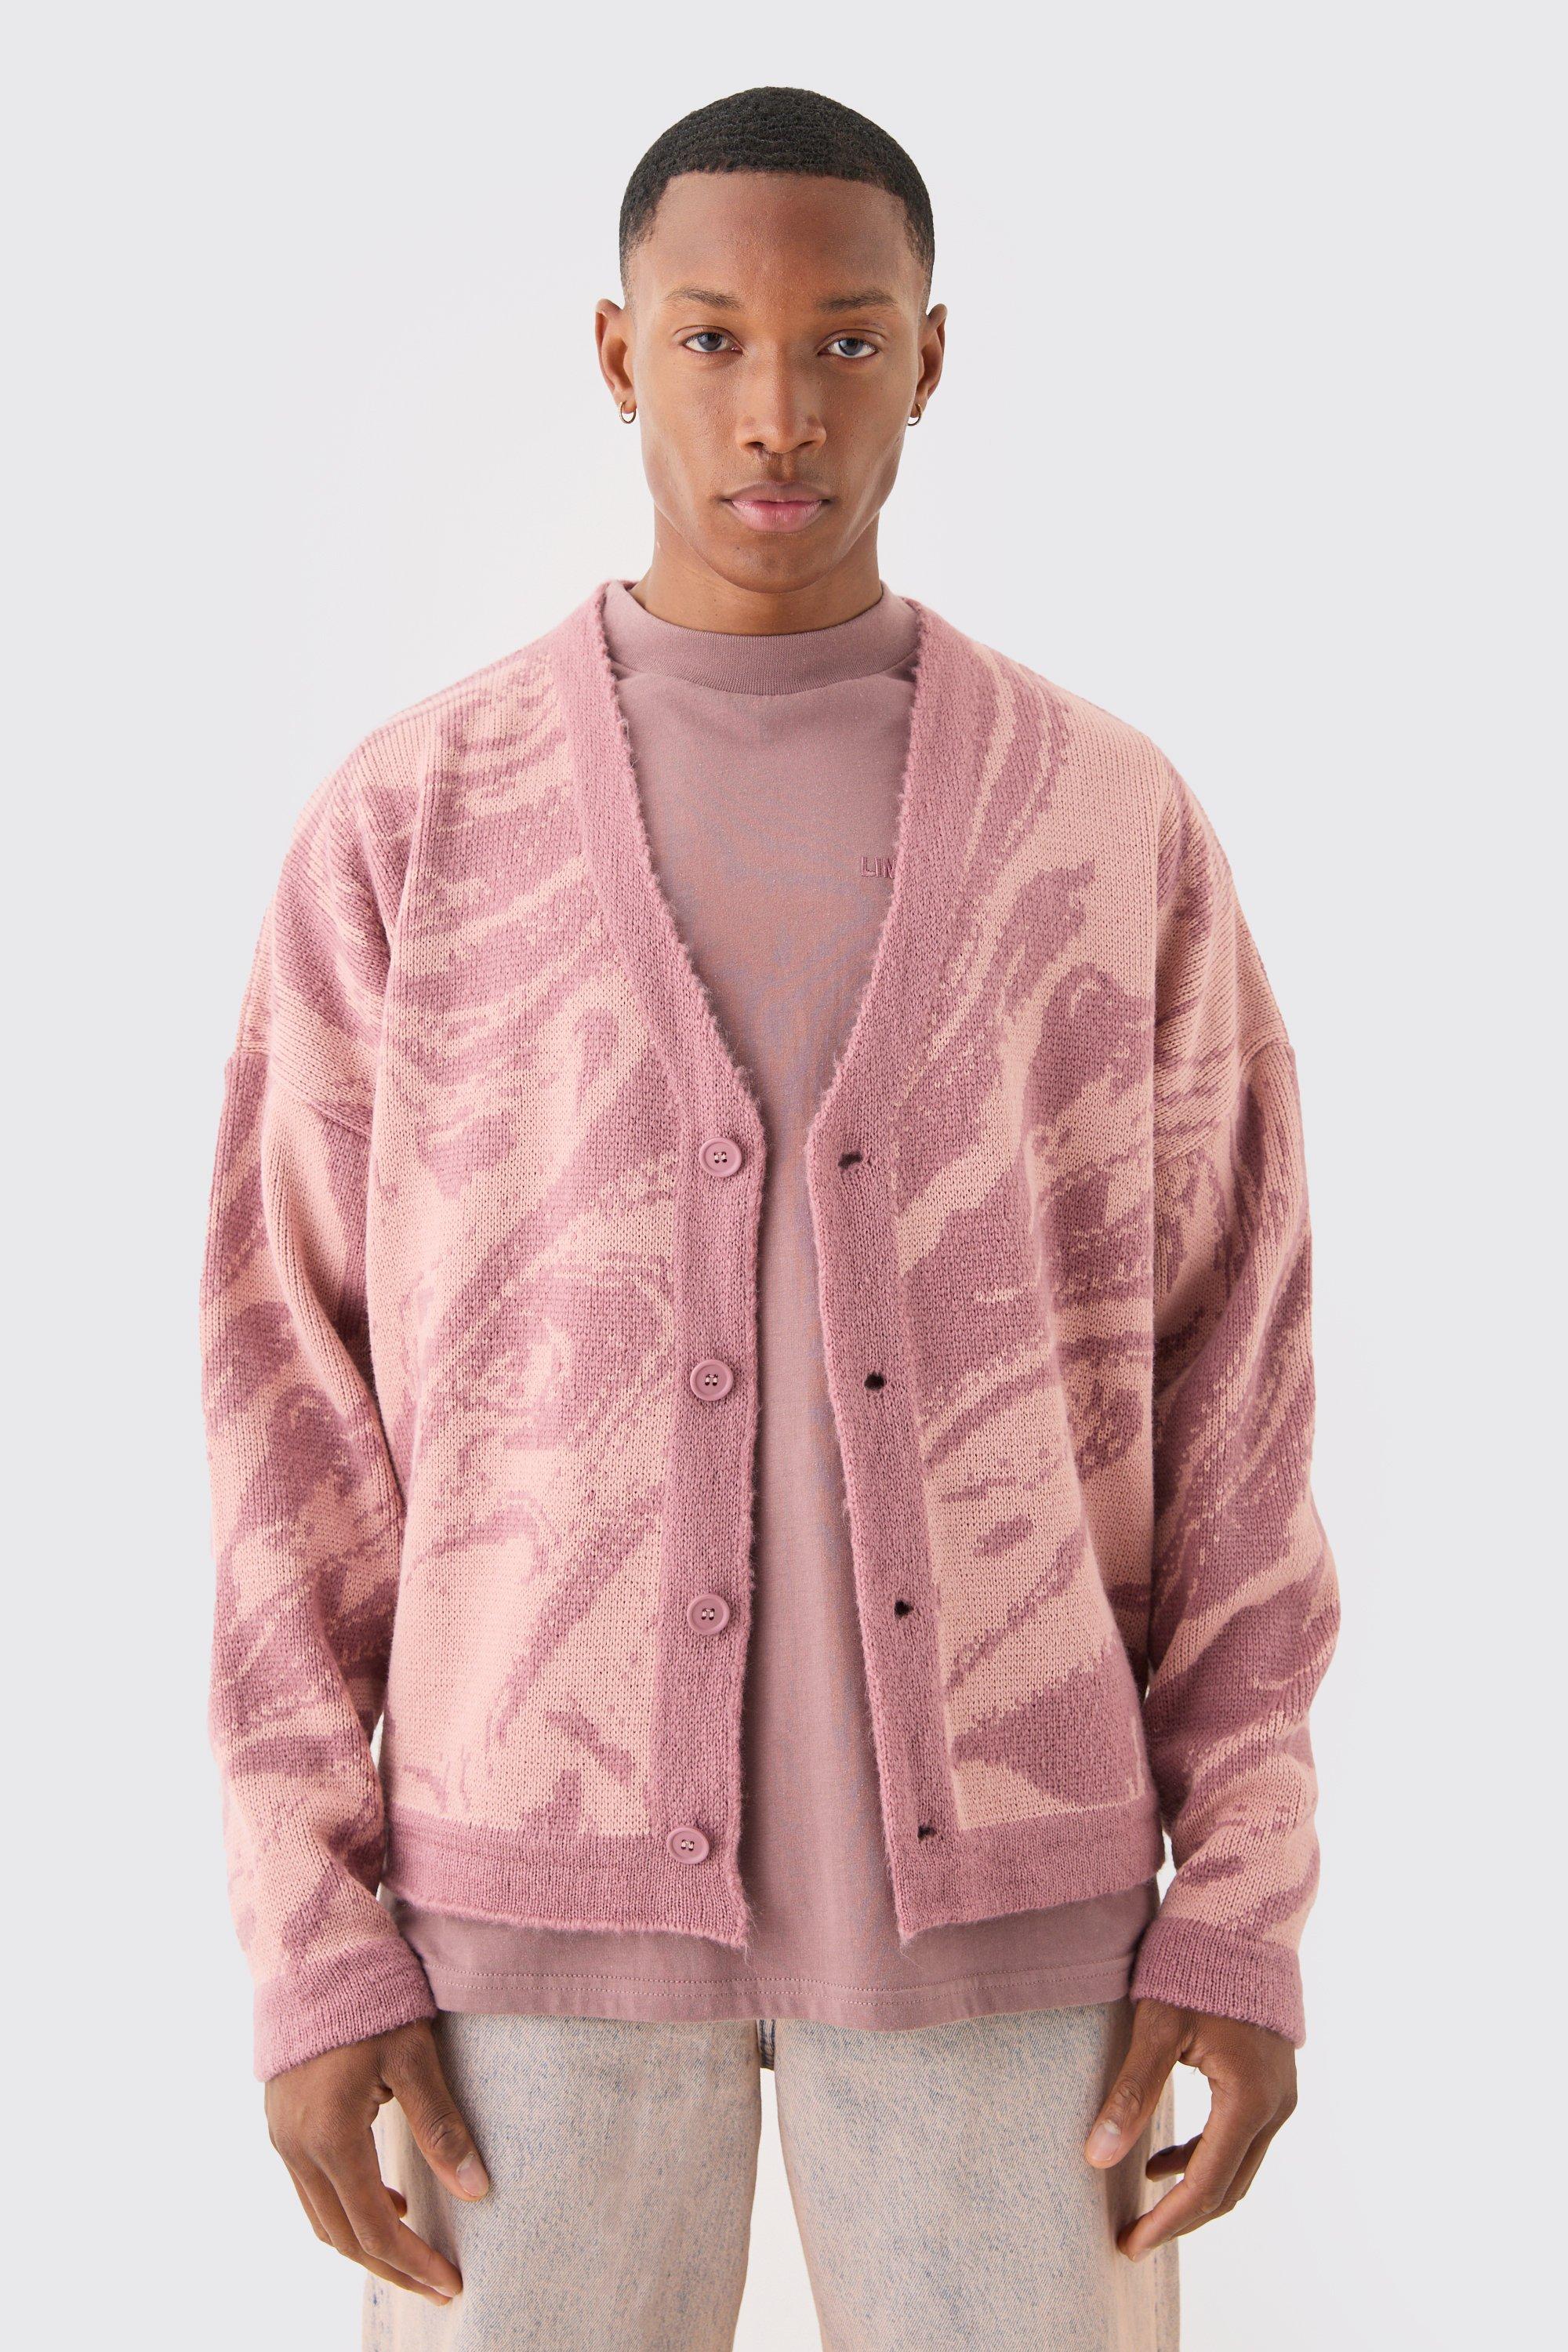 boxy oversized brushed abstract all over jacquard cardigan homme - rose - s, rose